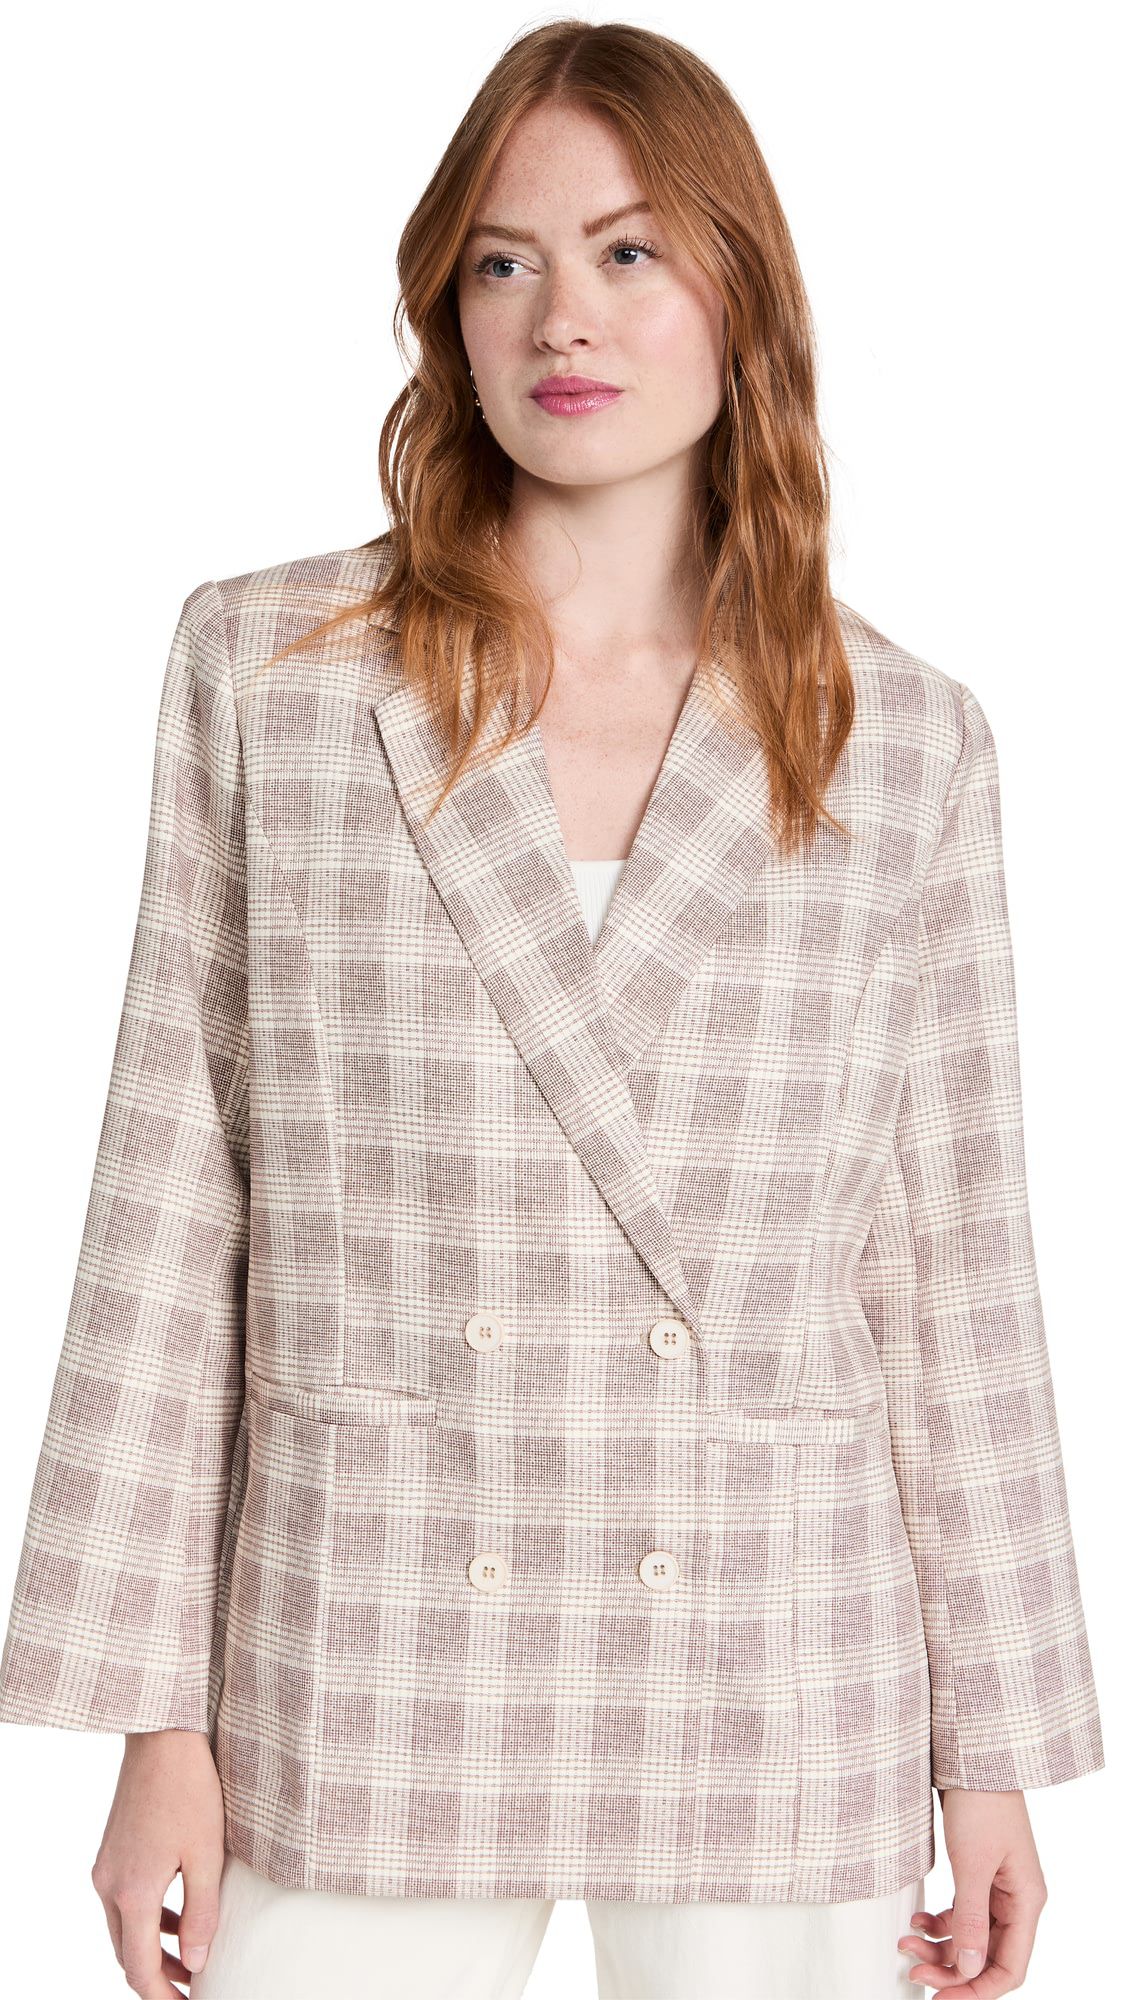 Casual Plaid Textured Double-breasted Blazer